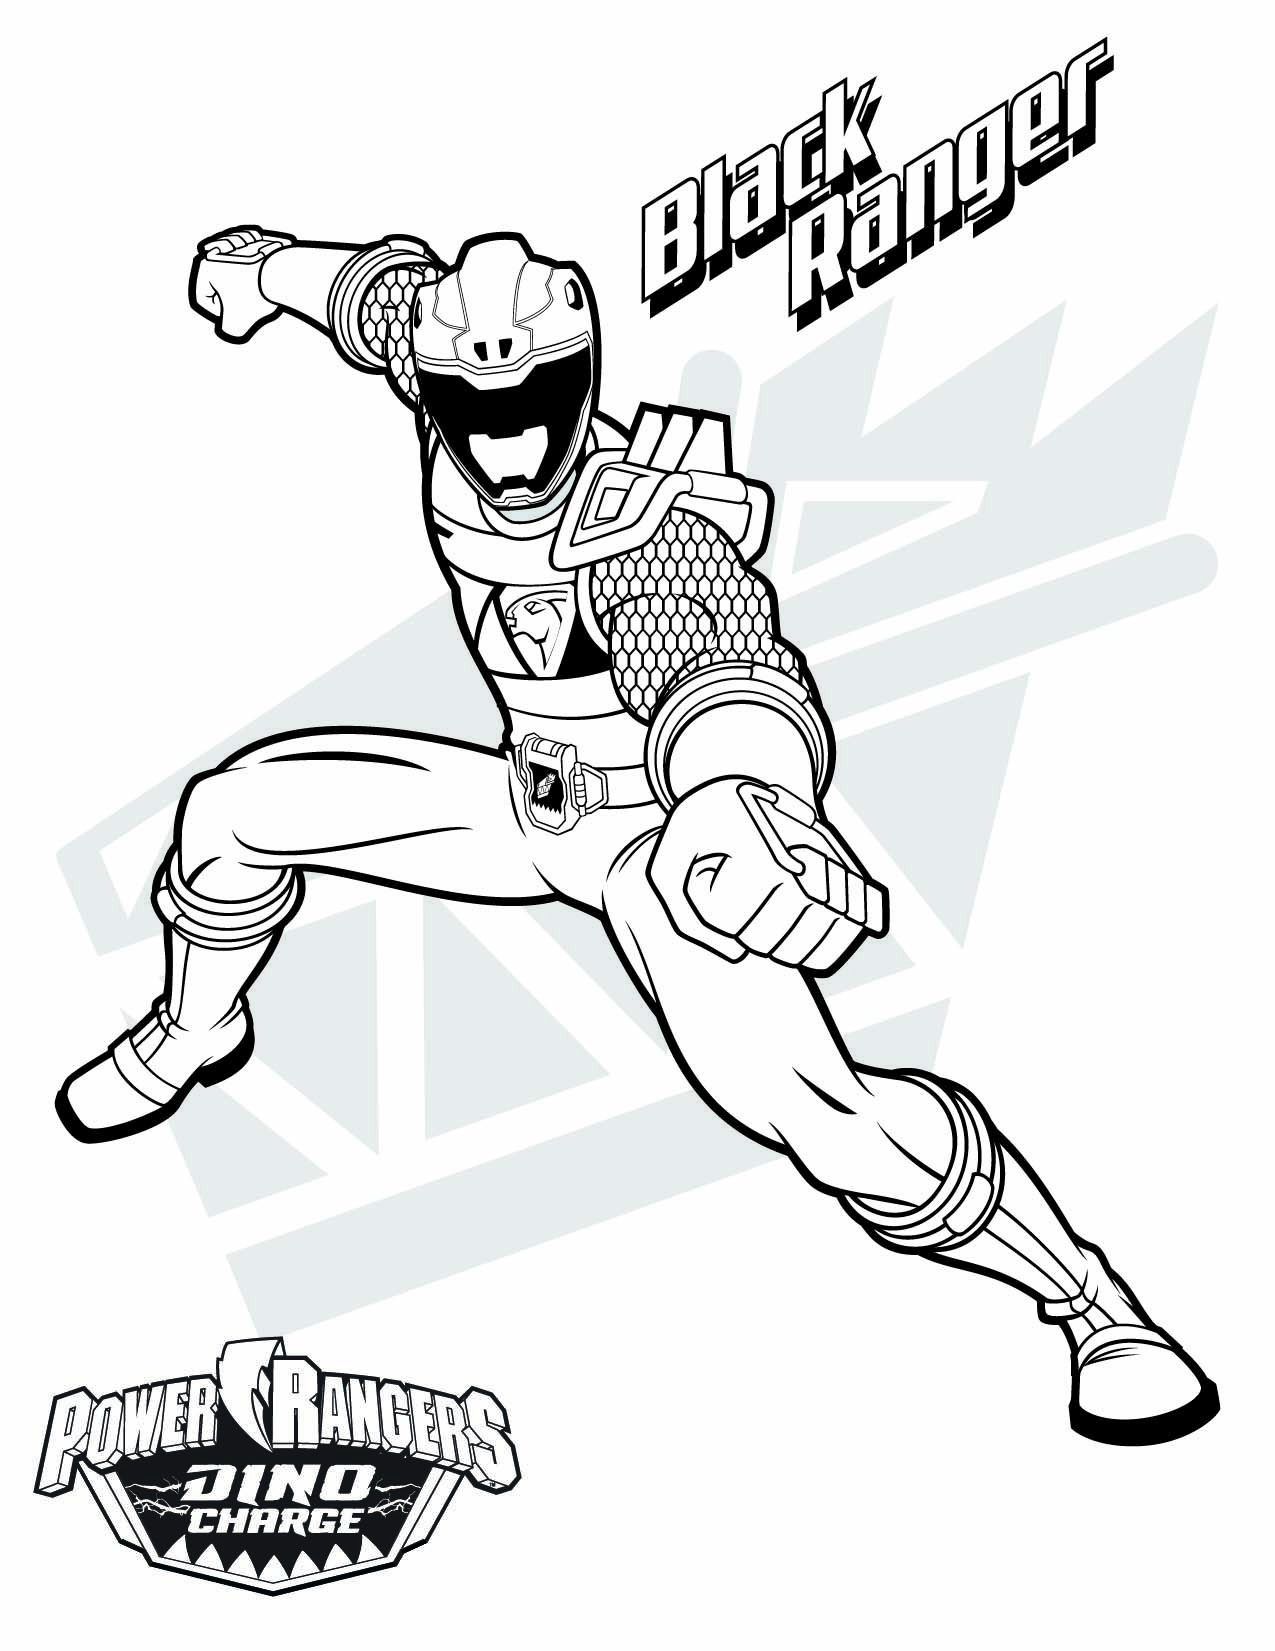 Printable Power Rangers Coloring Pages
 Pin by Power Rangers on Power Rangers Coloring Pages